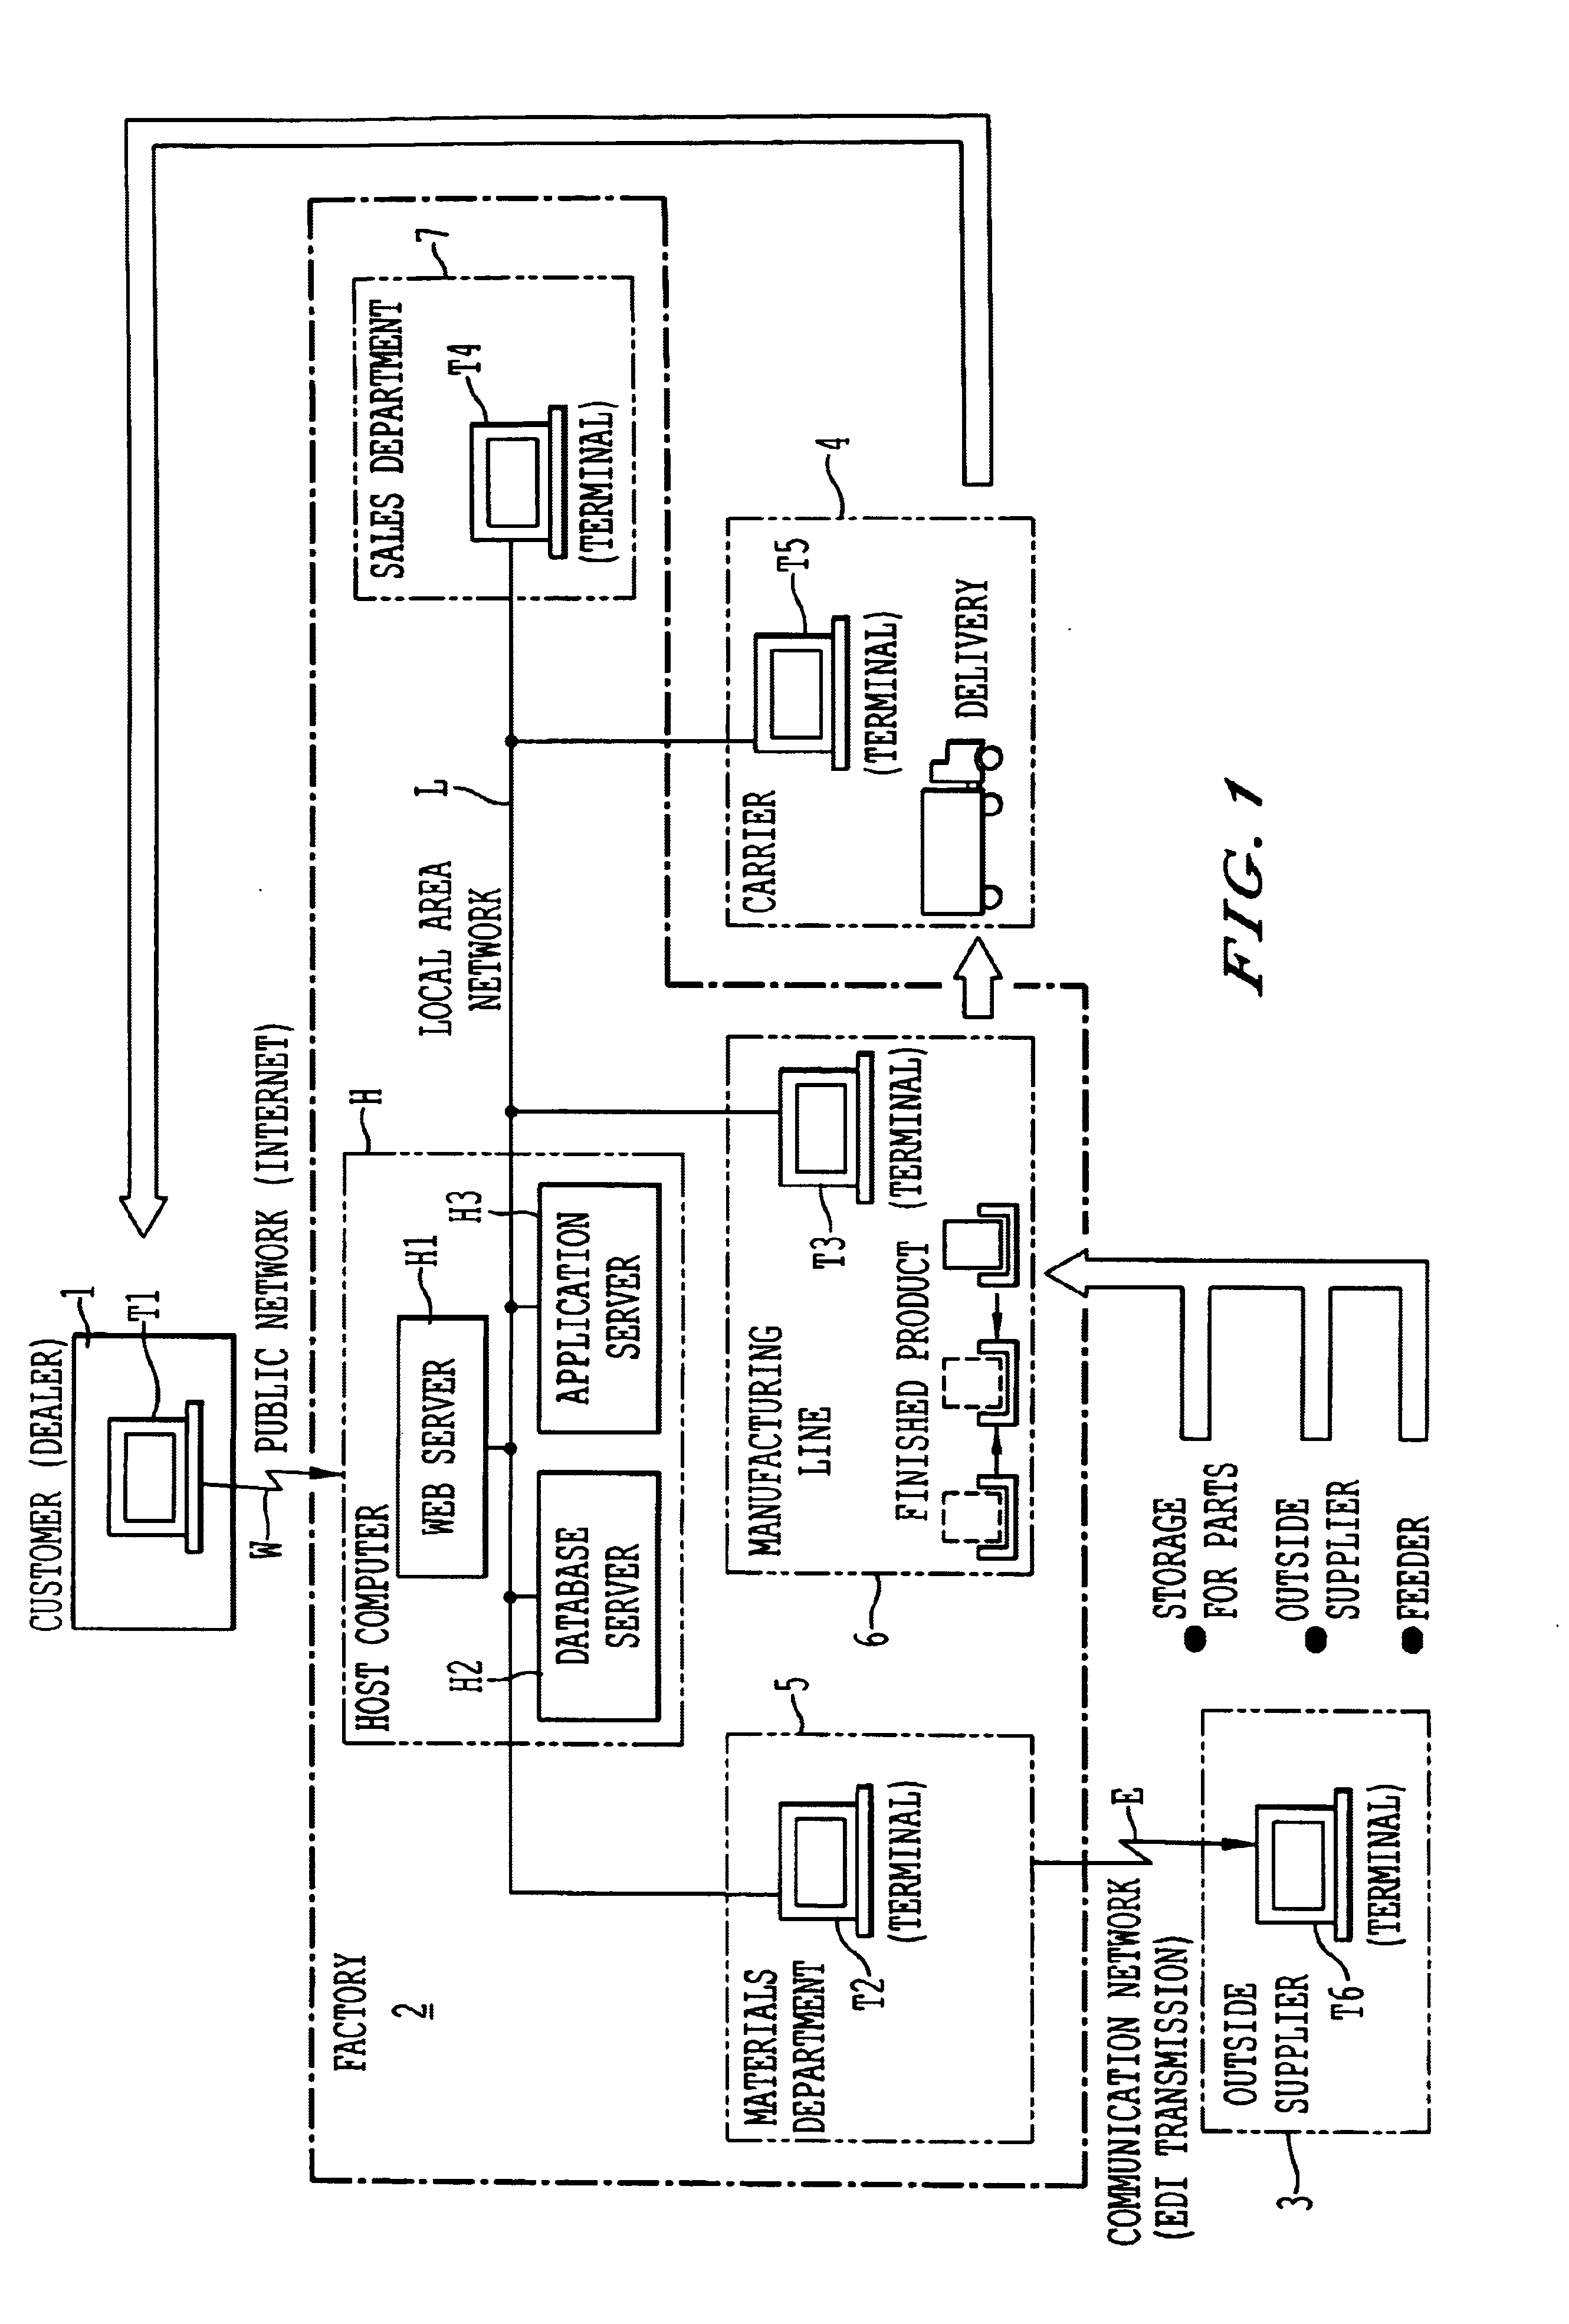 Production control system and method for producing air conditioners